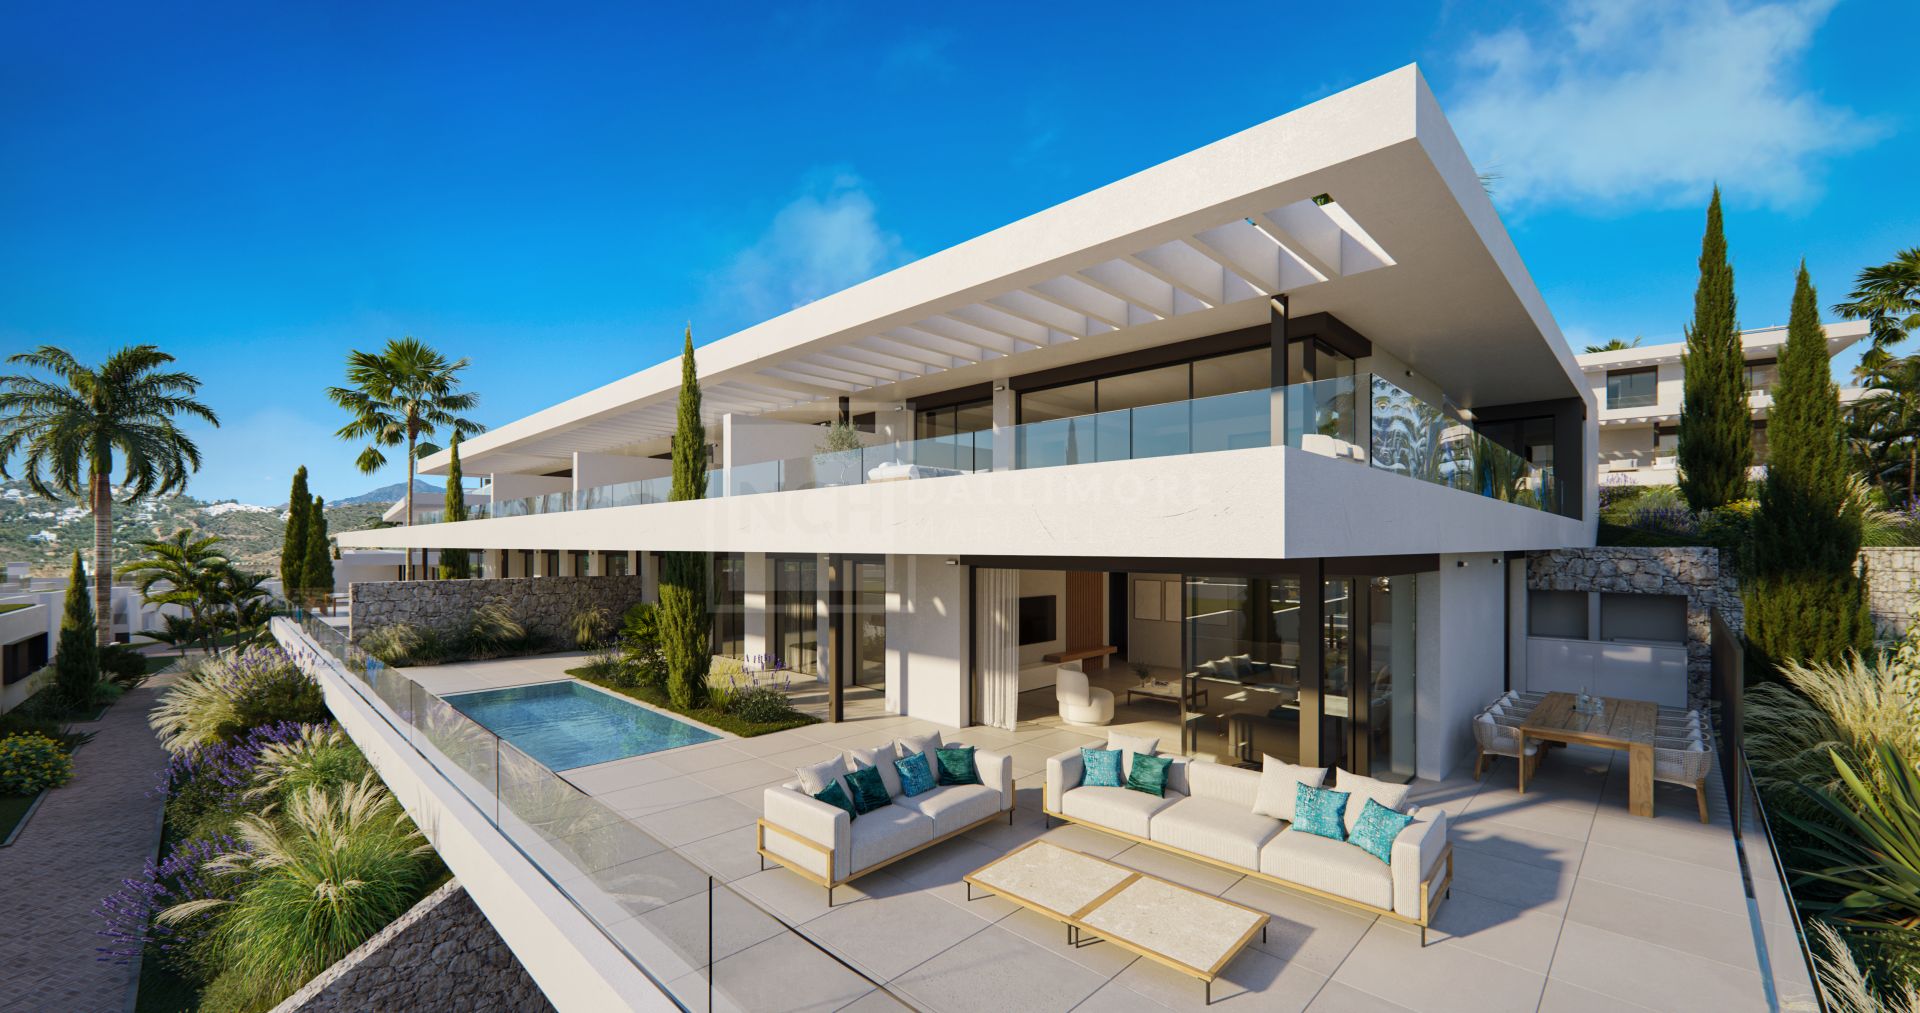 STUNNING BRAND NEW 4-BEDROOM CONTEMPORARY DUPLEX APARTMENT WITH SEA VIEWS EAST OF MARBELLA